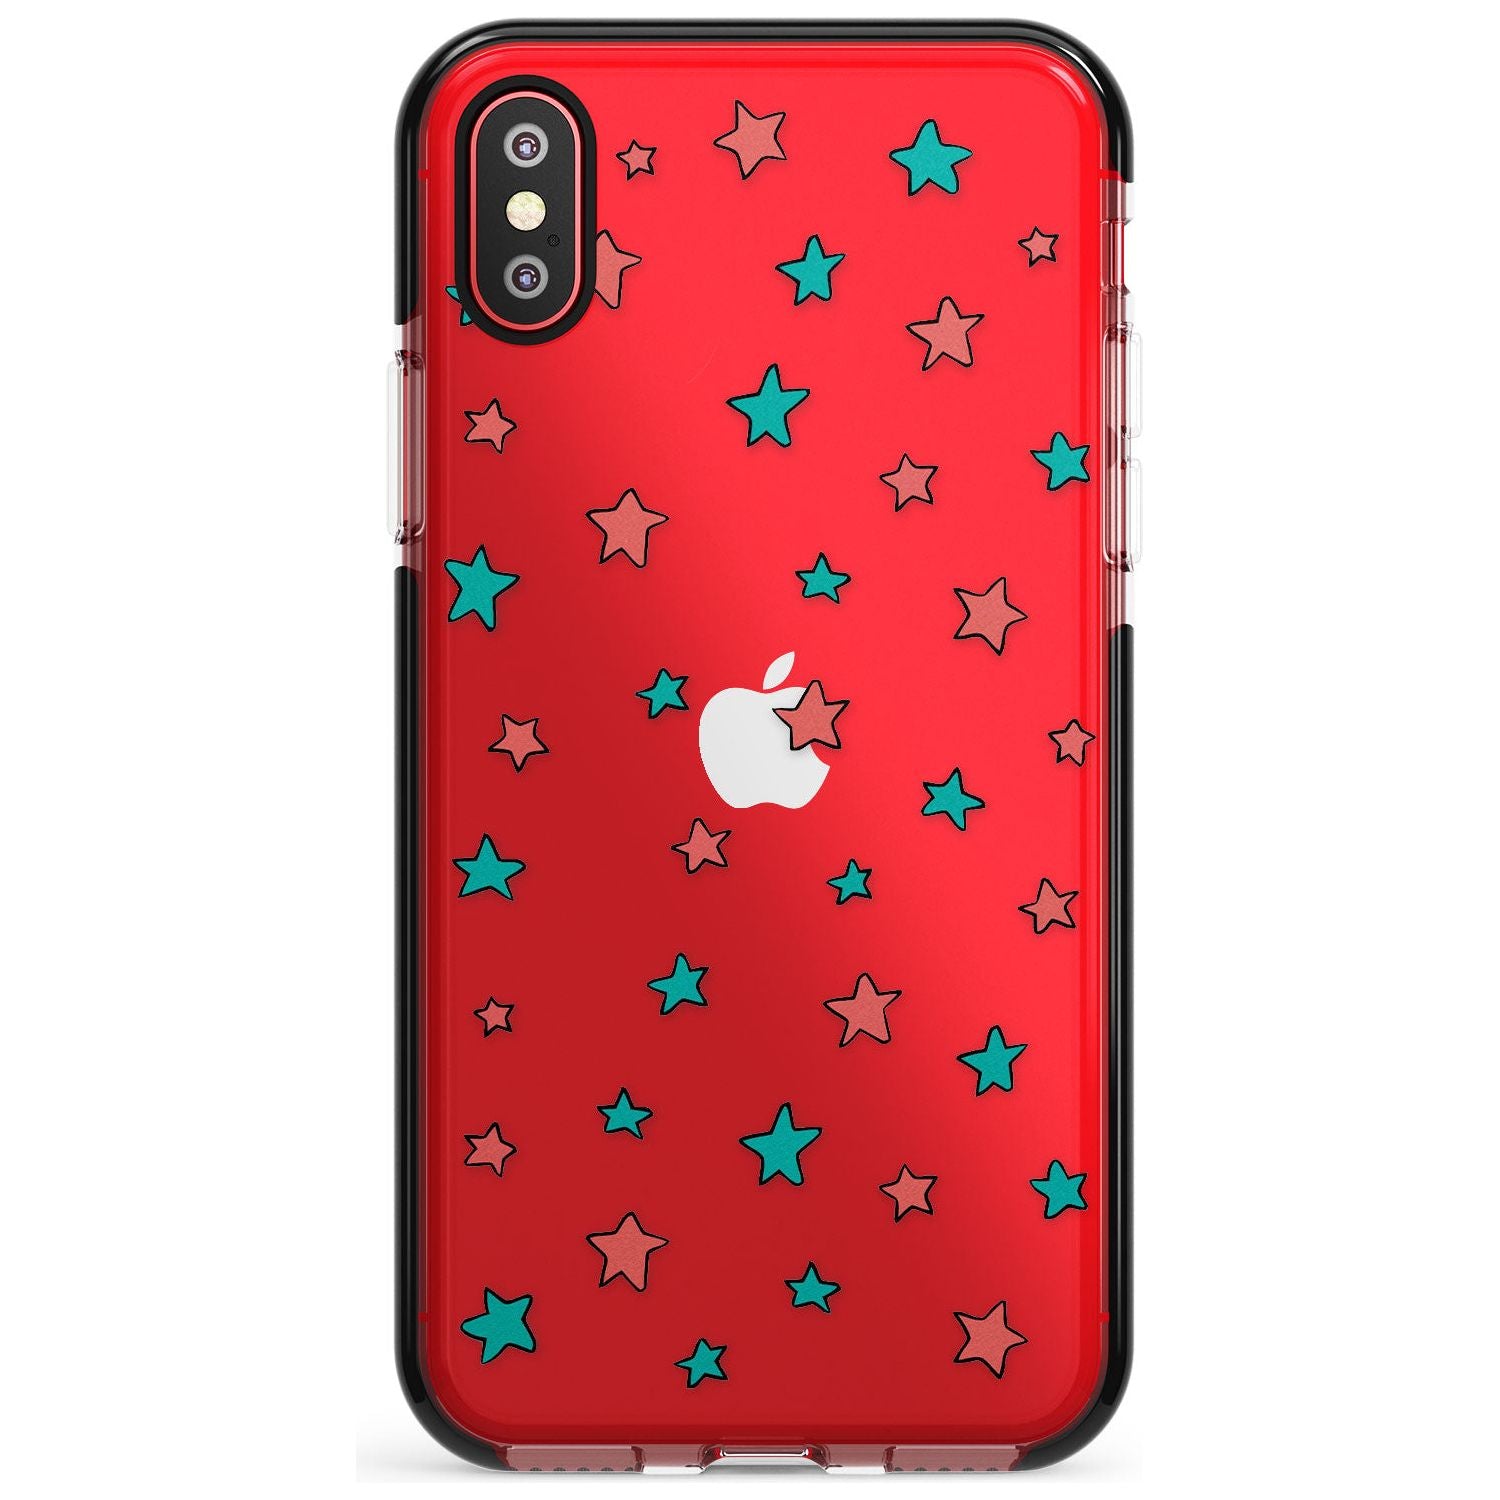 Heartstopper Stars Pattern Black Impact Phone Case for iPhone X XS Max XR